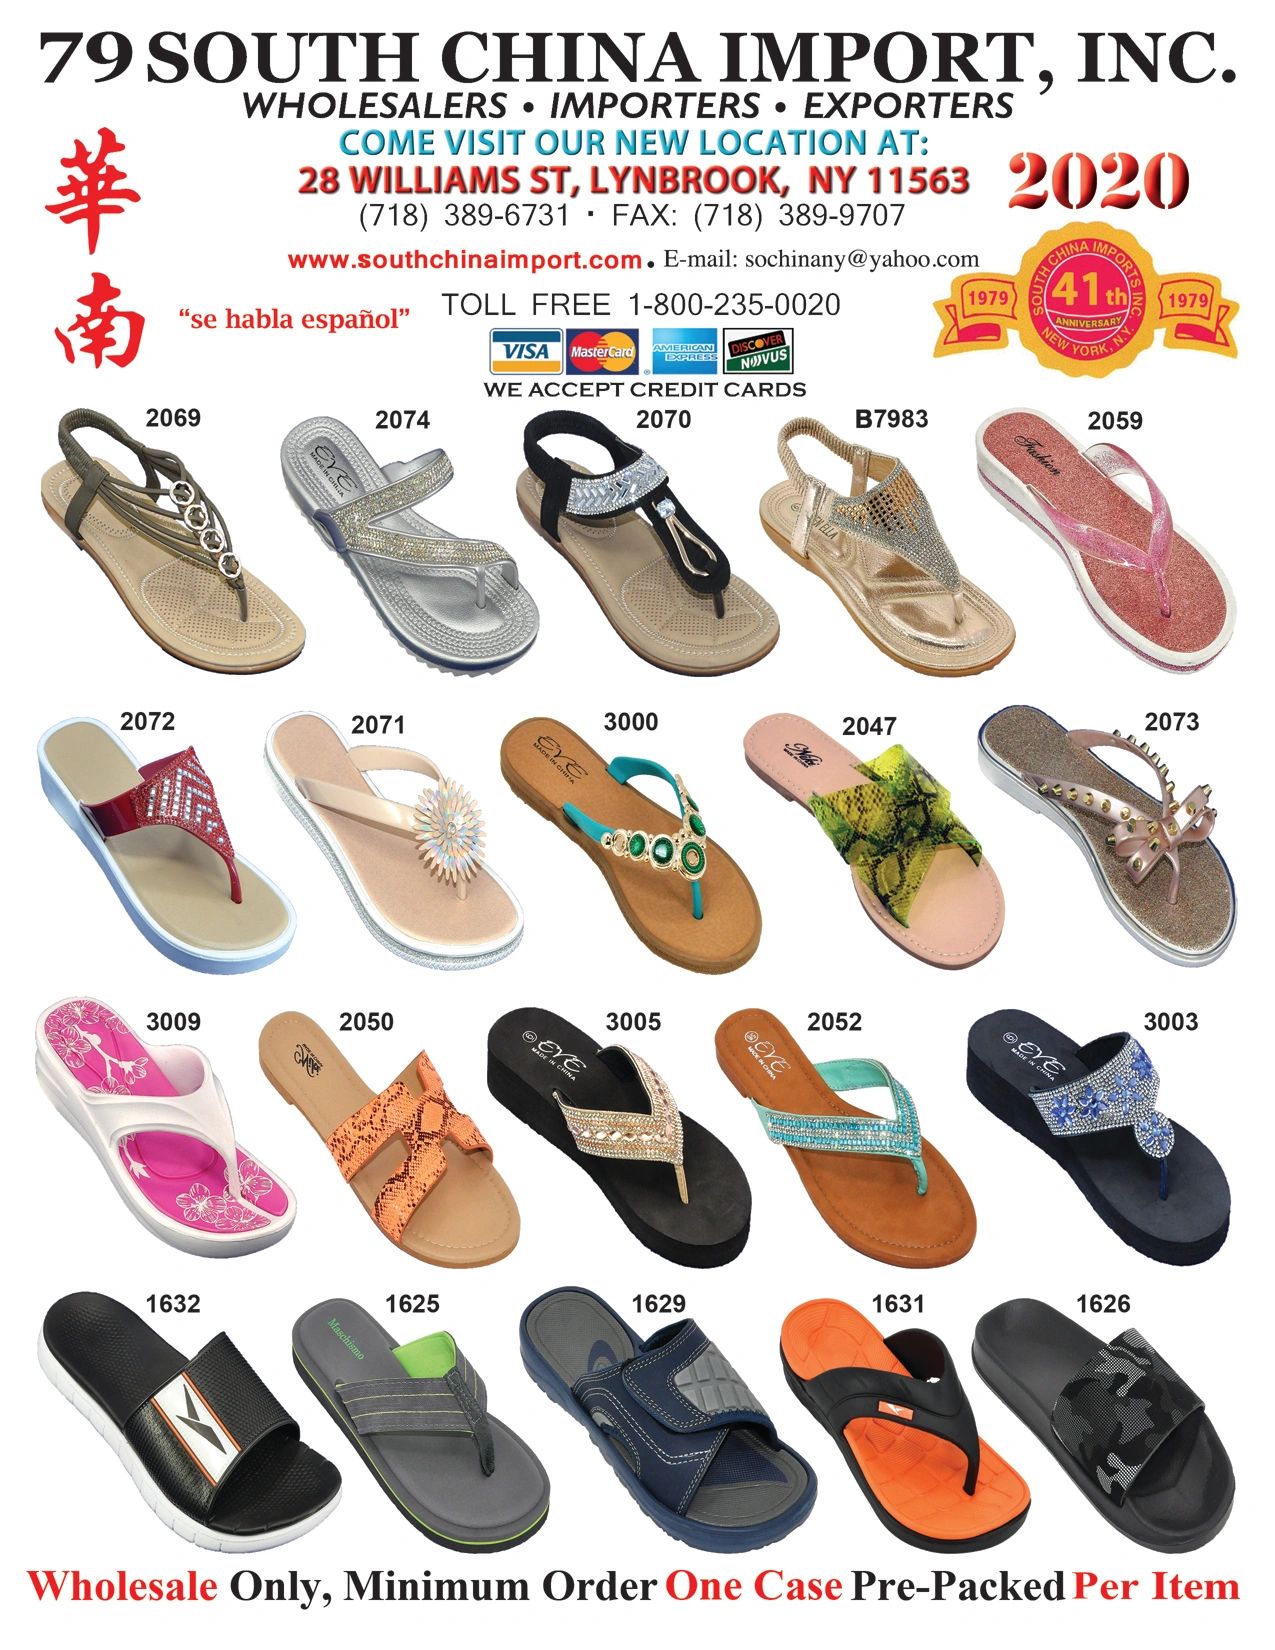 imported sandals online